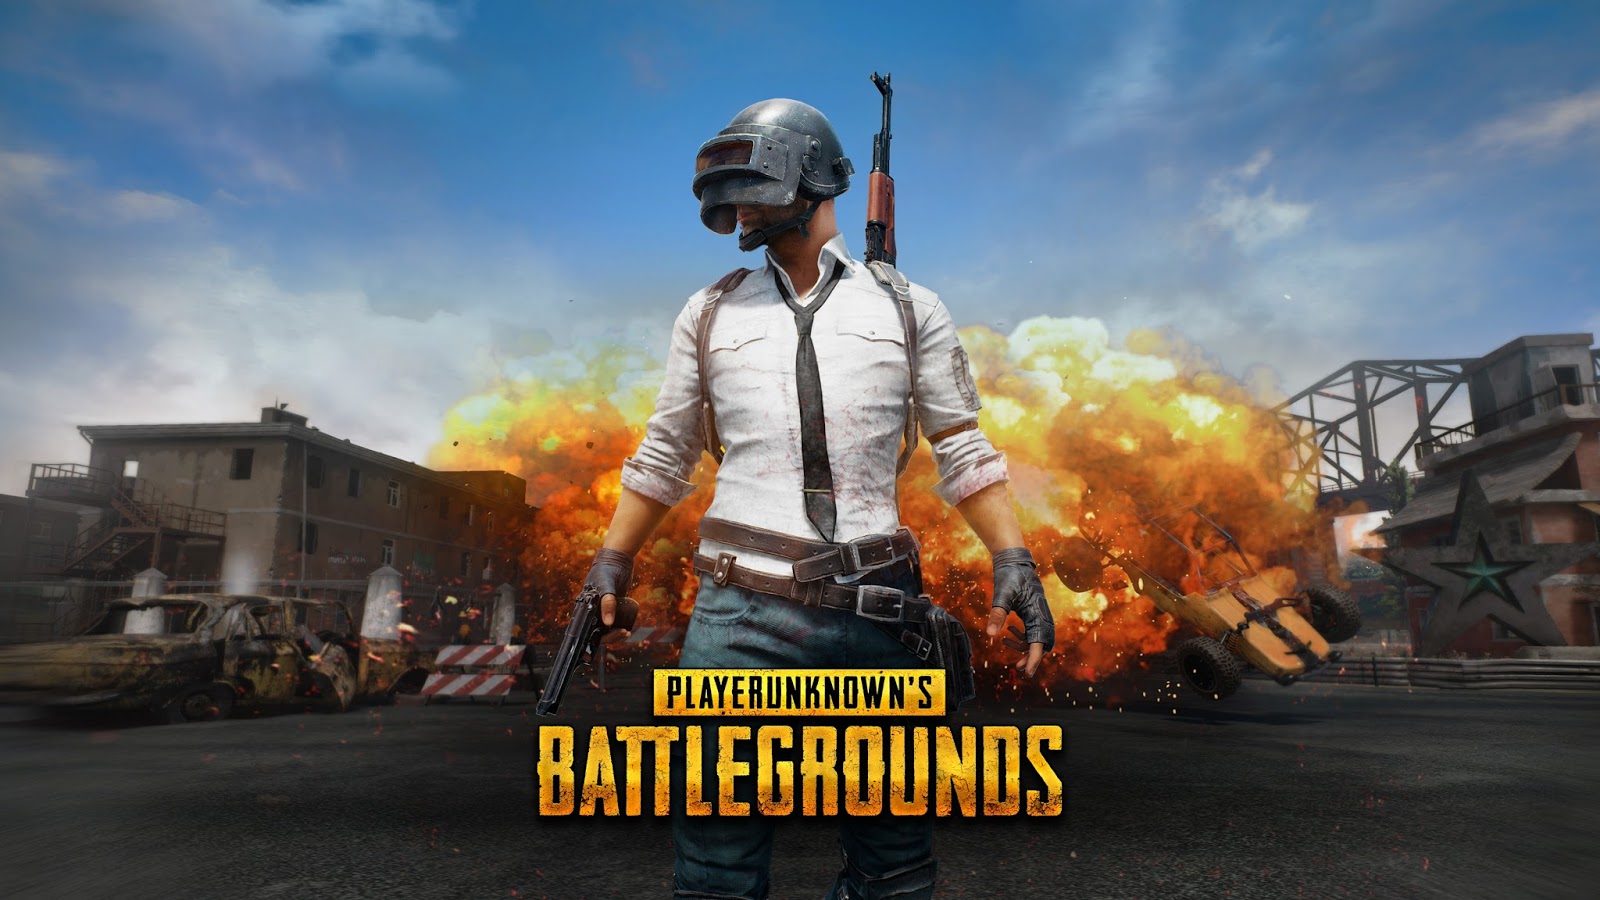 Análise: PlayerUnknown's Battlegrounds (PC/XBO): um colosso que